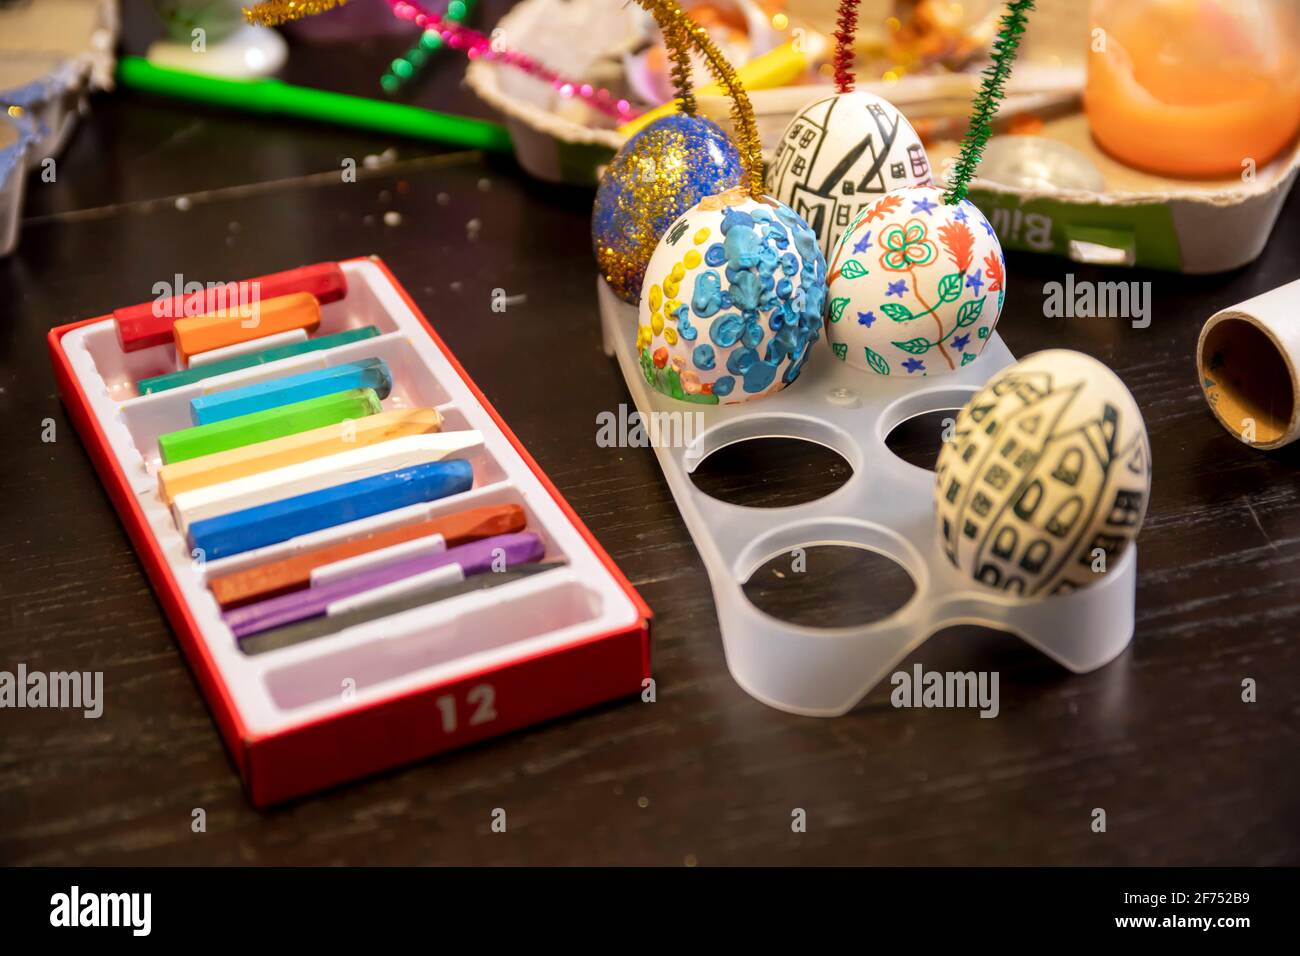 Easter egg painting and decorating activity concept: Colorful handmade Easter eggs. Preparation for the holidays. Stationary objects on the table. Stock Photo